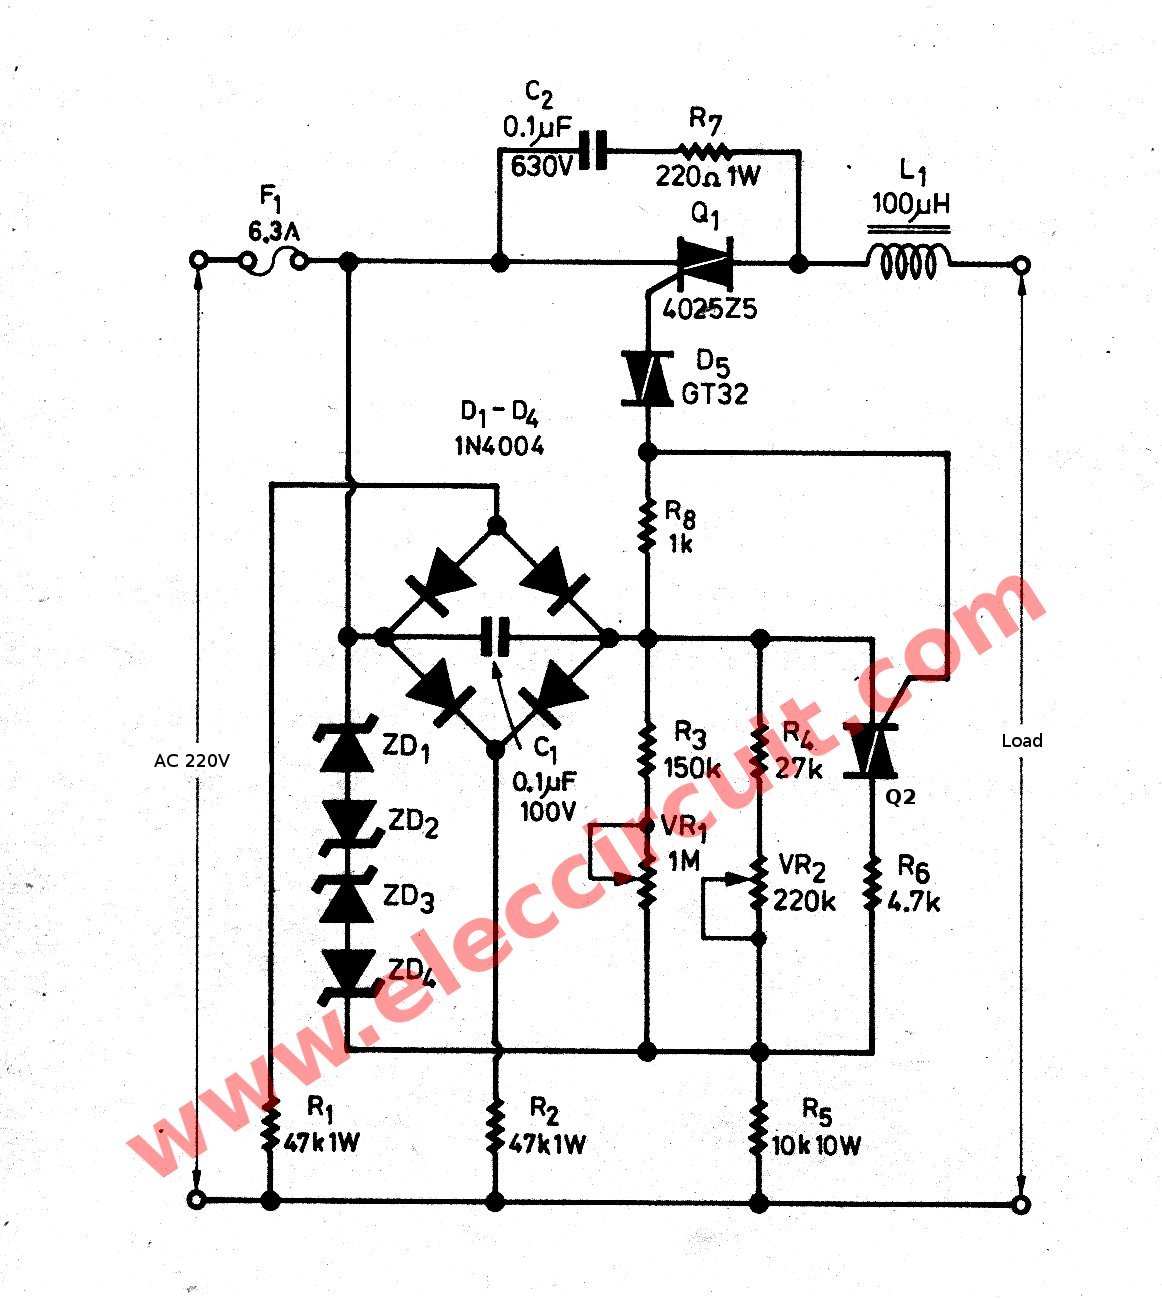 Schematic-Diagram-of-the-3000-watts-Dimmer-for-Inductor-Load.jpg